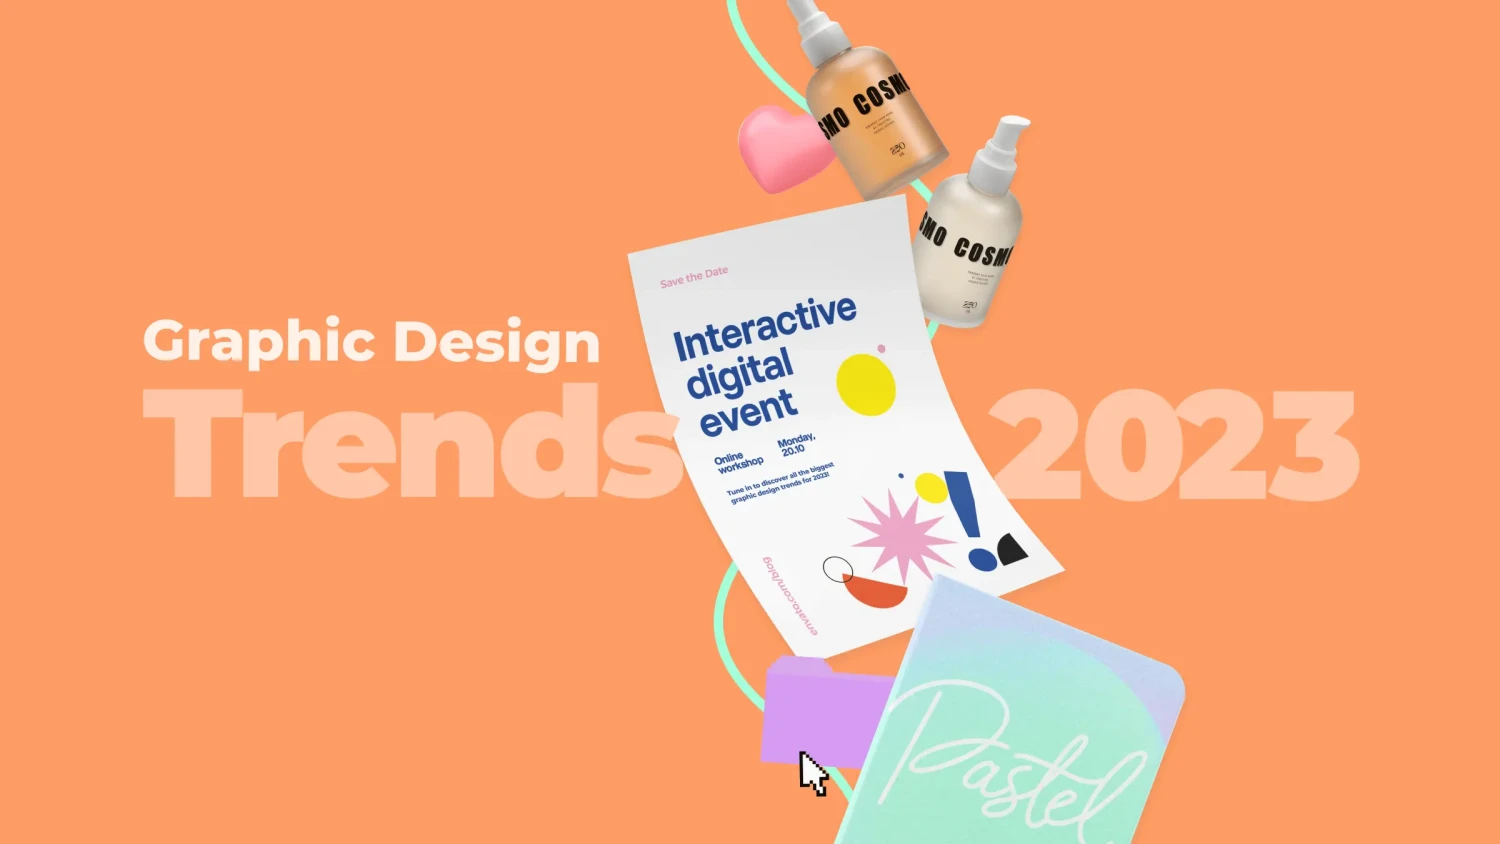 Freelance Graphic Design Trends to Watch